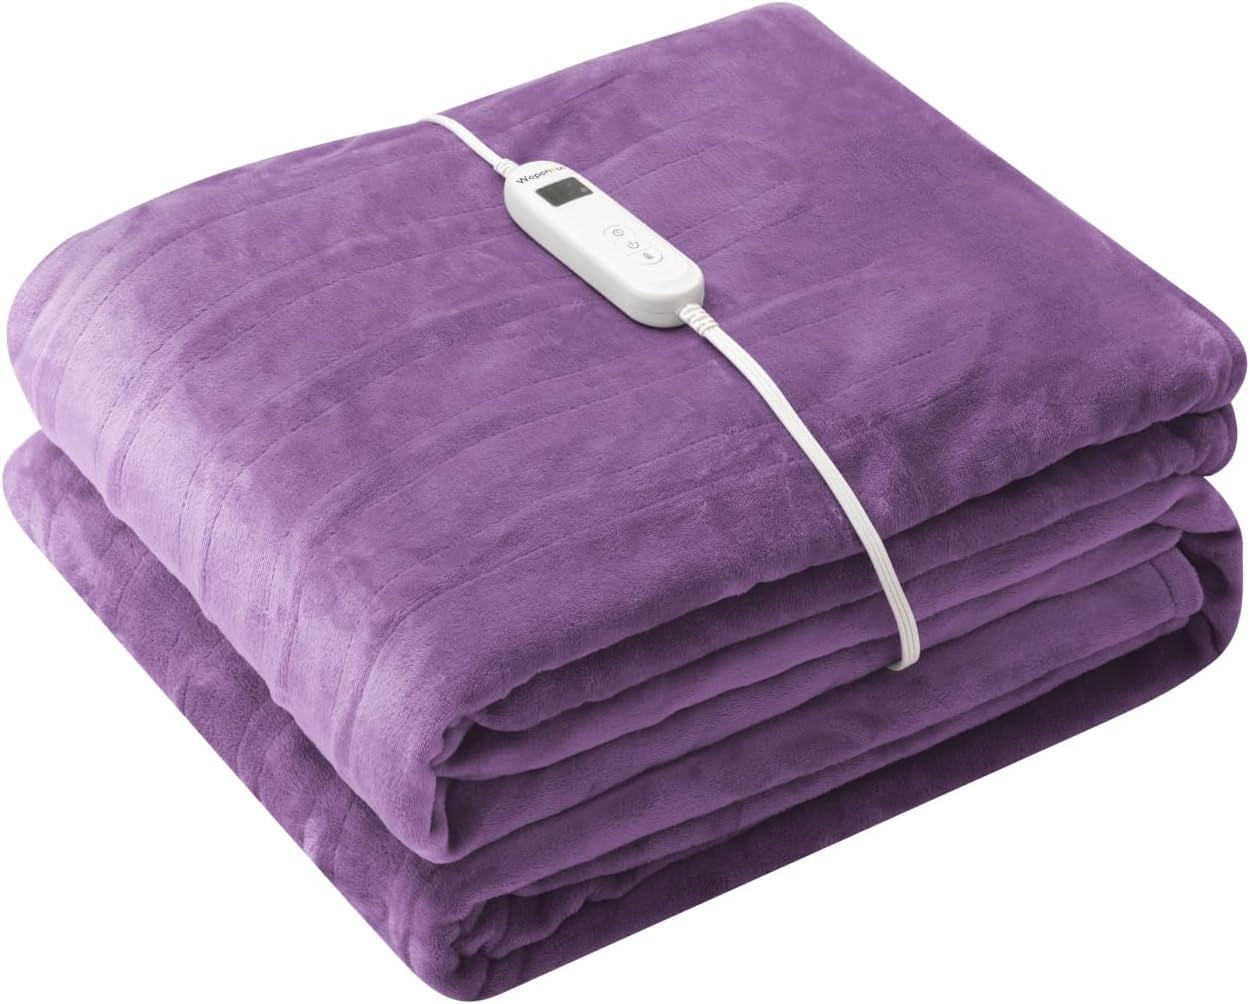 Electric Blankets & Heated Throws: Do the running costs stack up